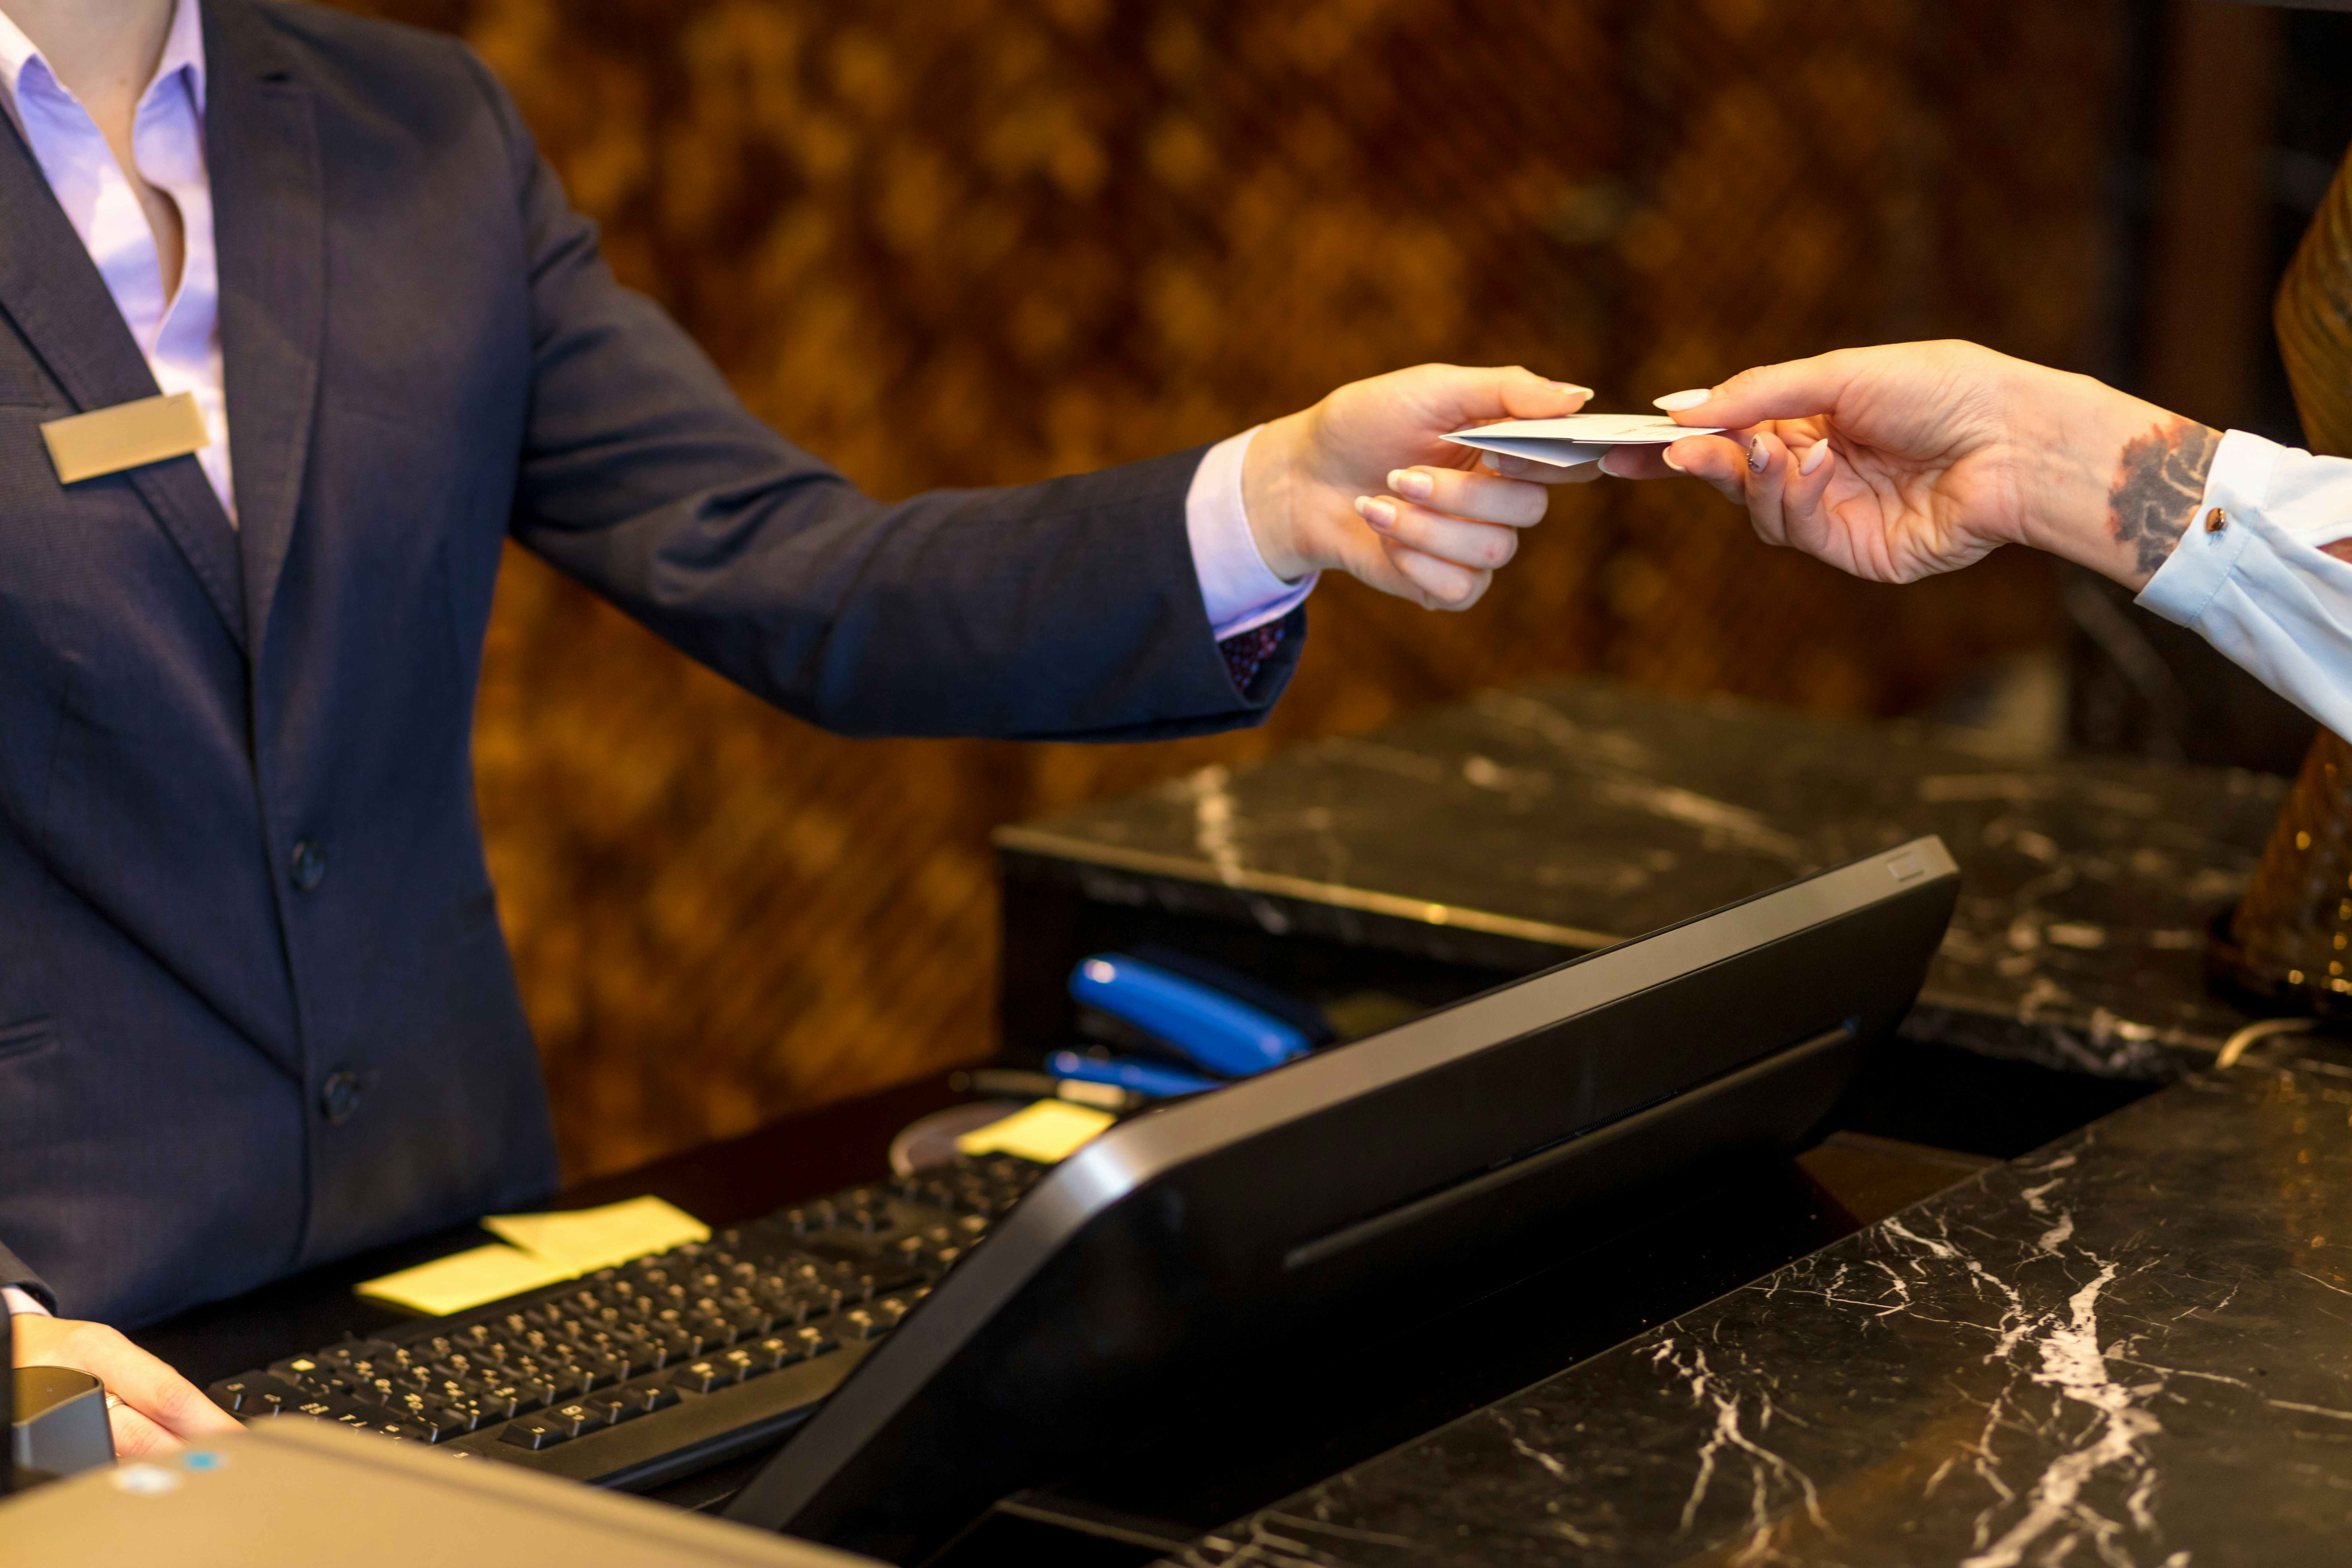 A person being handed a hotel room key at the check-in desk